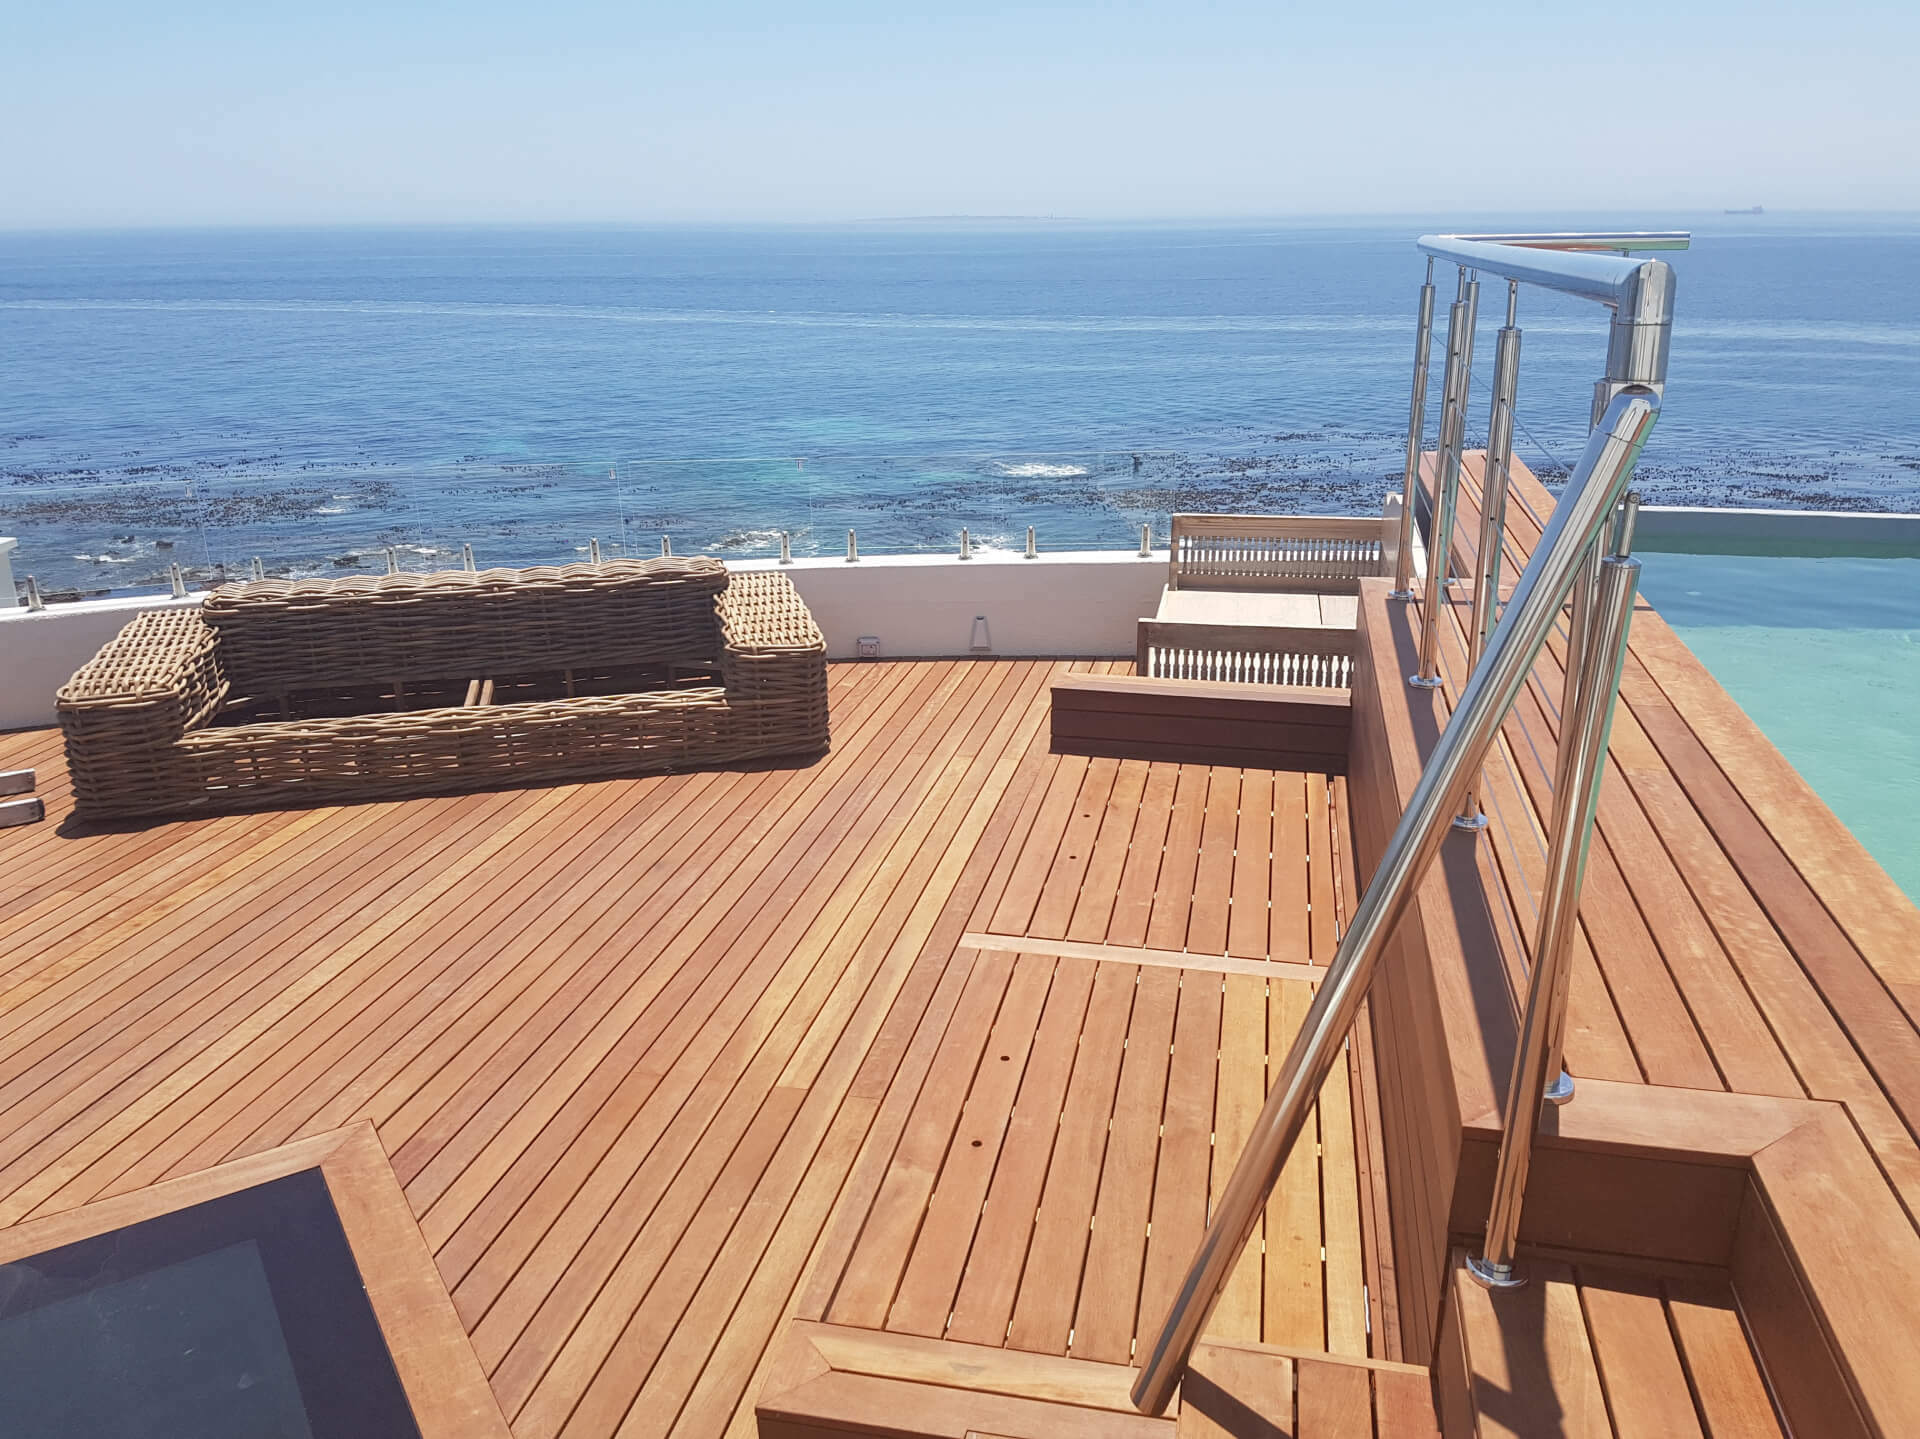 Timber deck with Chrome railing